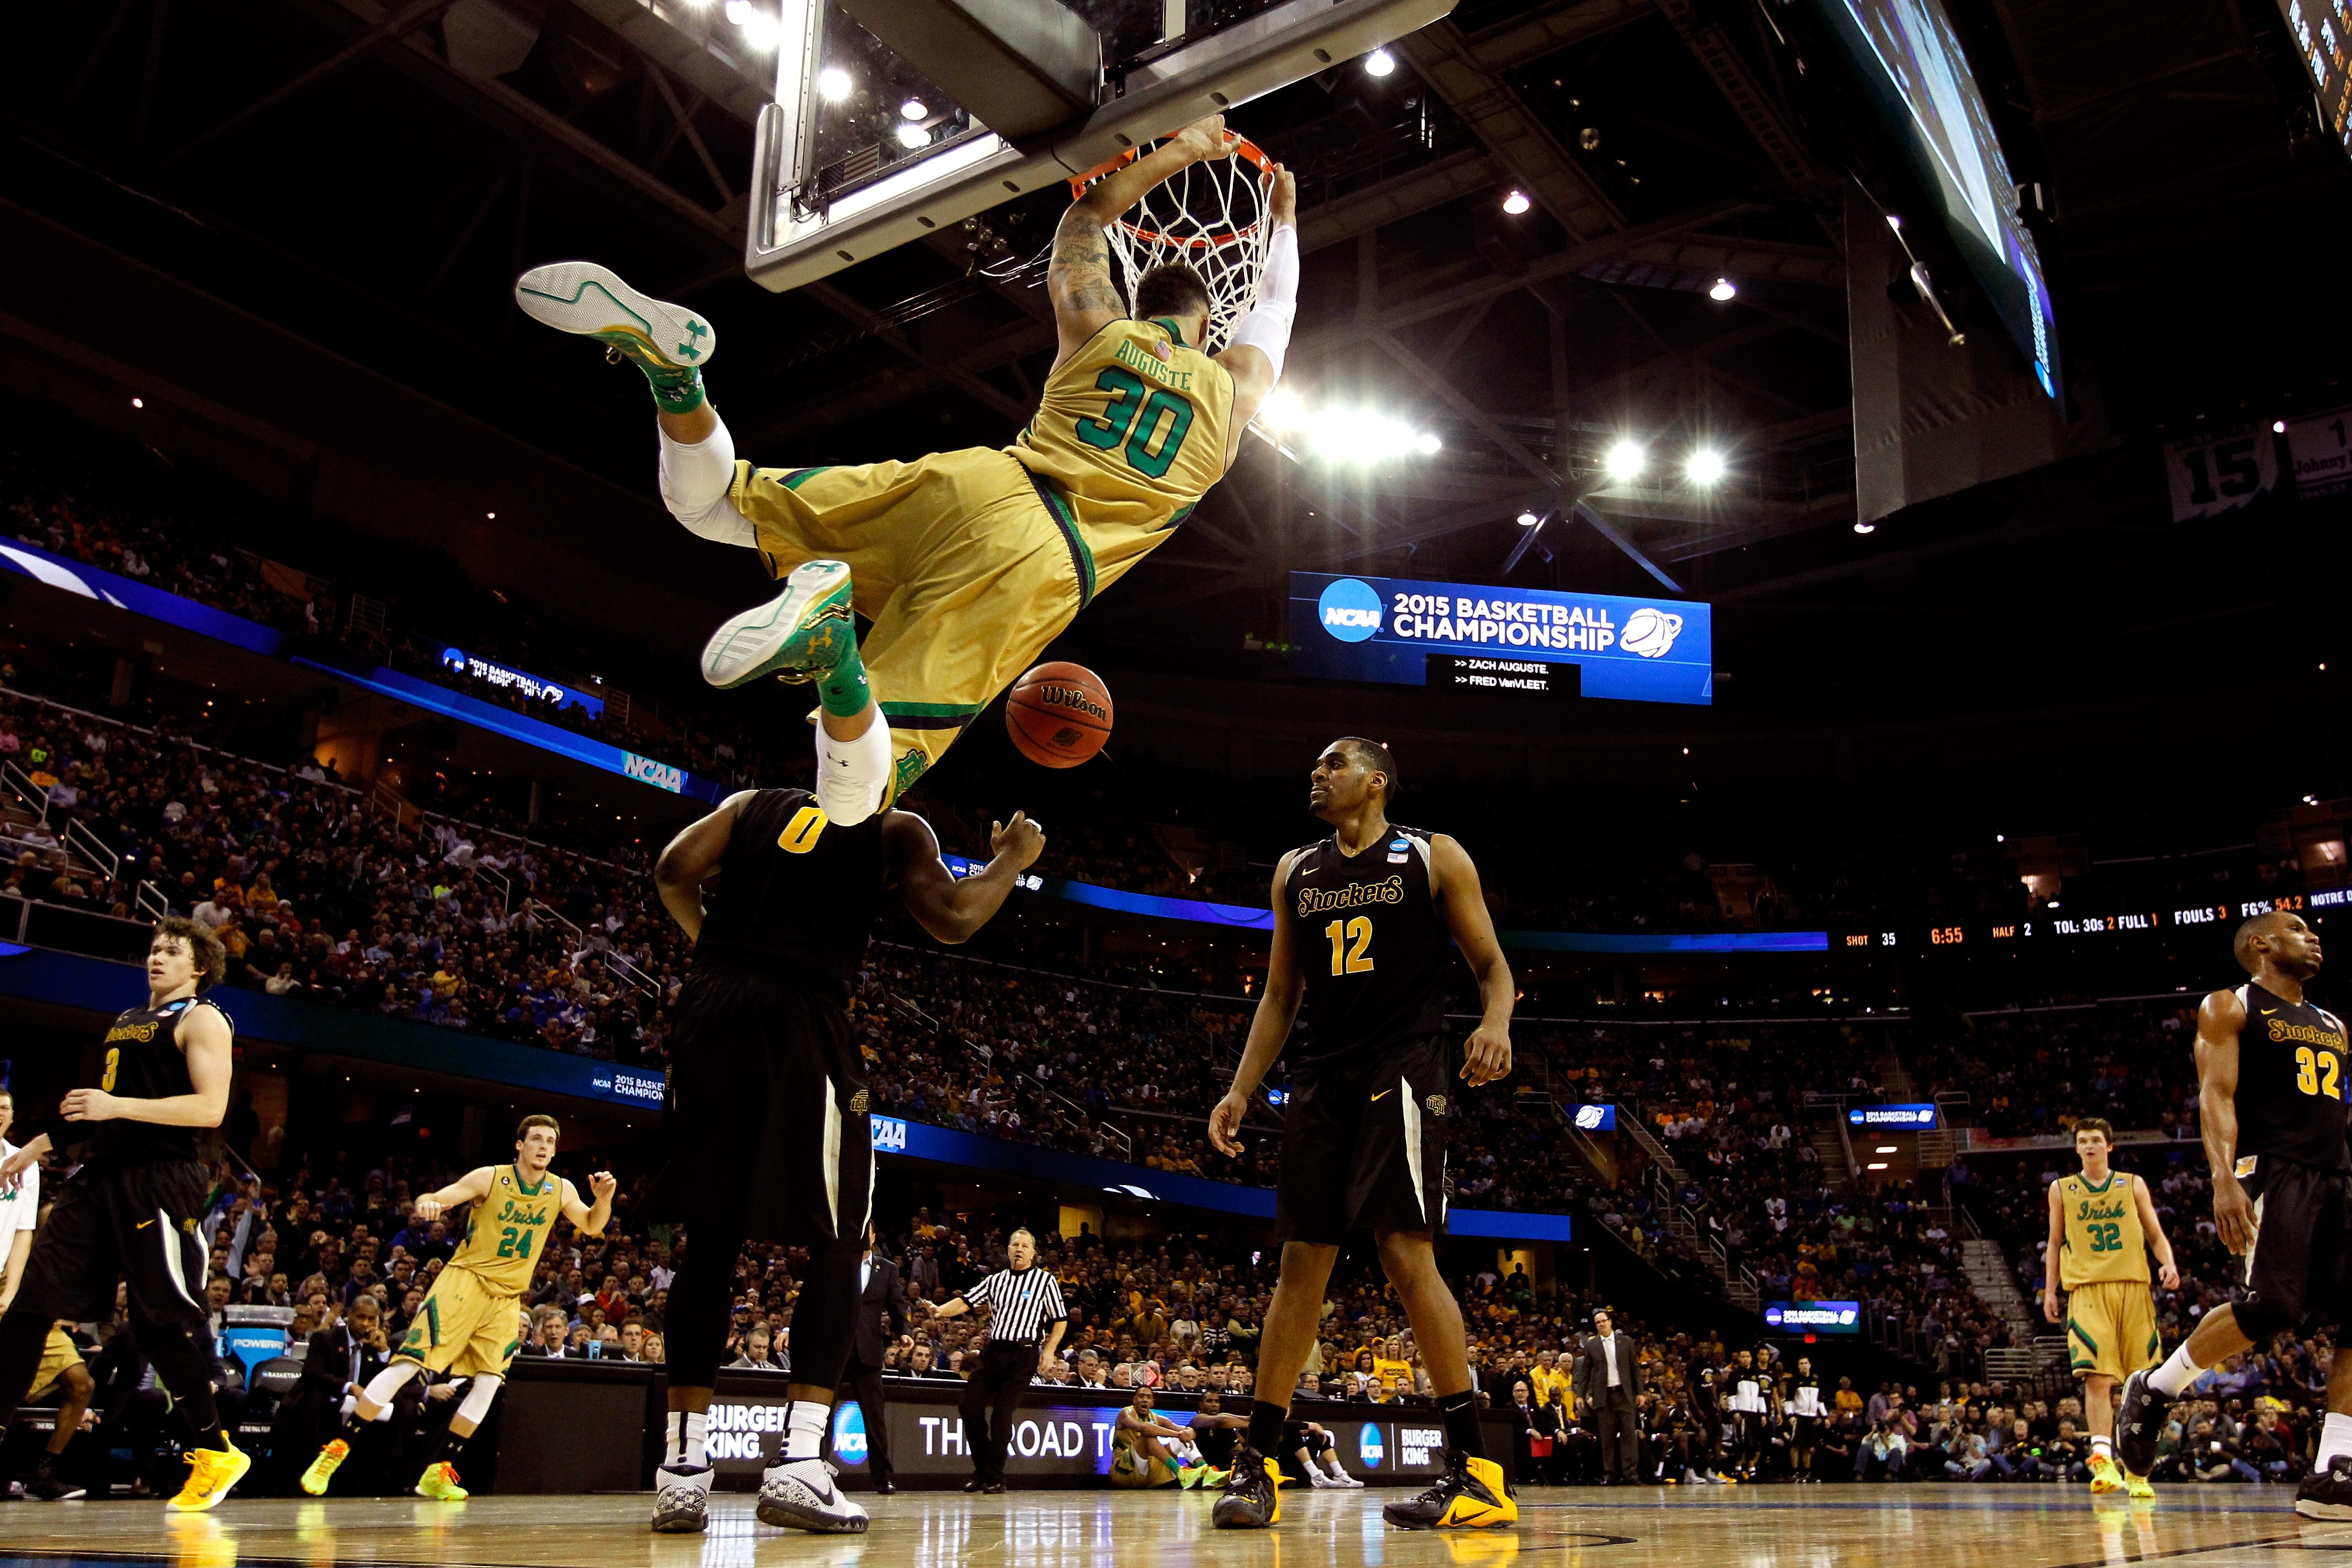 Zach Auguste #30 of the Notre Dame Fighting Irish dunks in the second half against Rashard Kelly #0 and Darius Carter #12 of the Wichita State Shockers during the Midwest Regional semifinal of the 2015 NCAA Men's Basketball Tournament at Quicken Loans Arena on March 26, 2015 in Cleveland, Ohio. (Gregory Shamus—Getty Images)